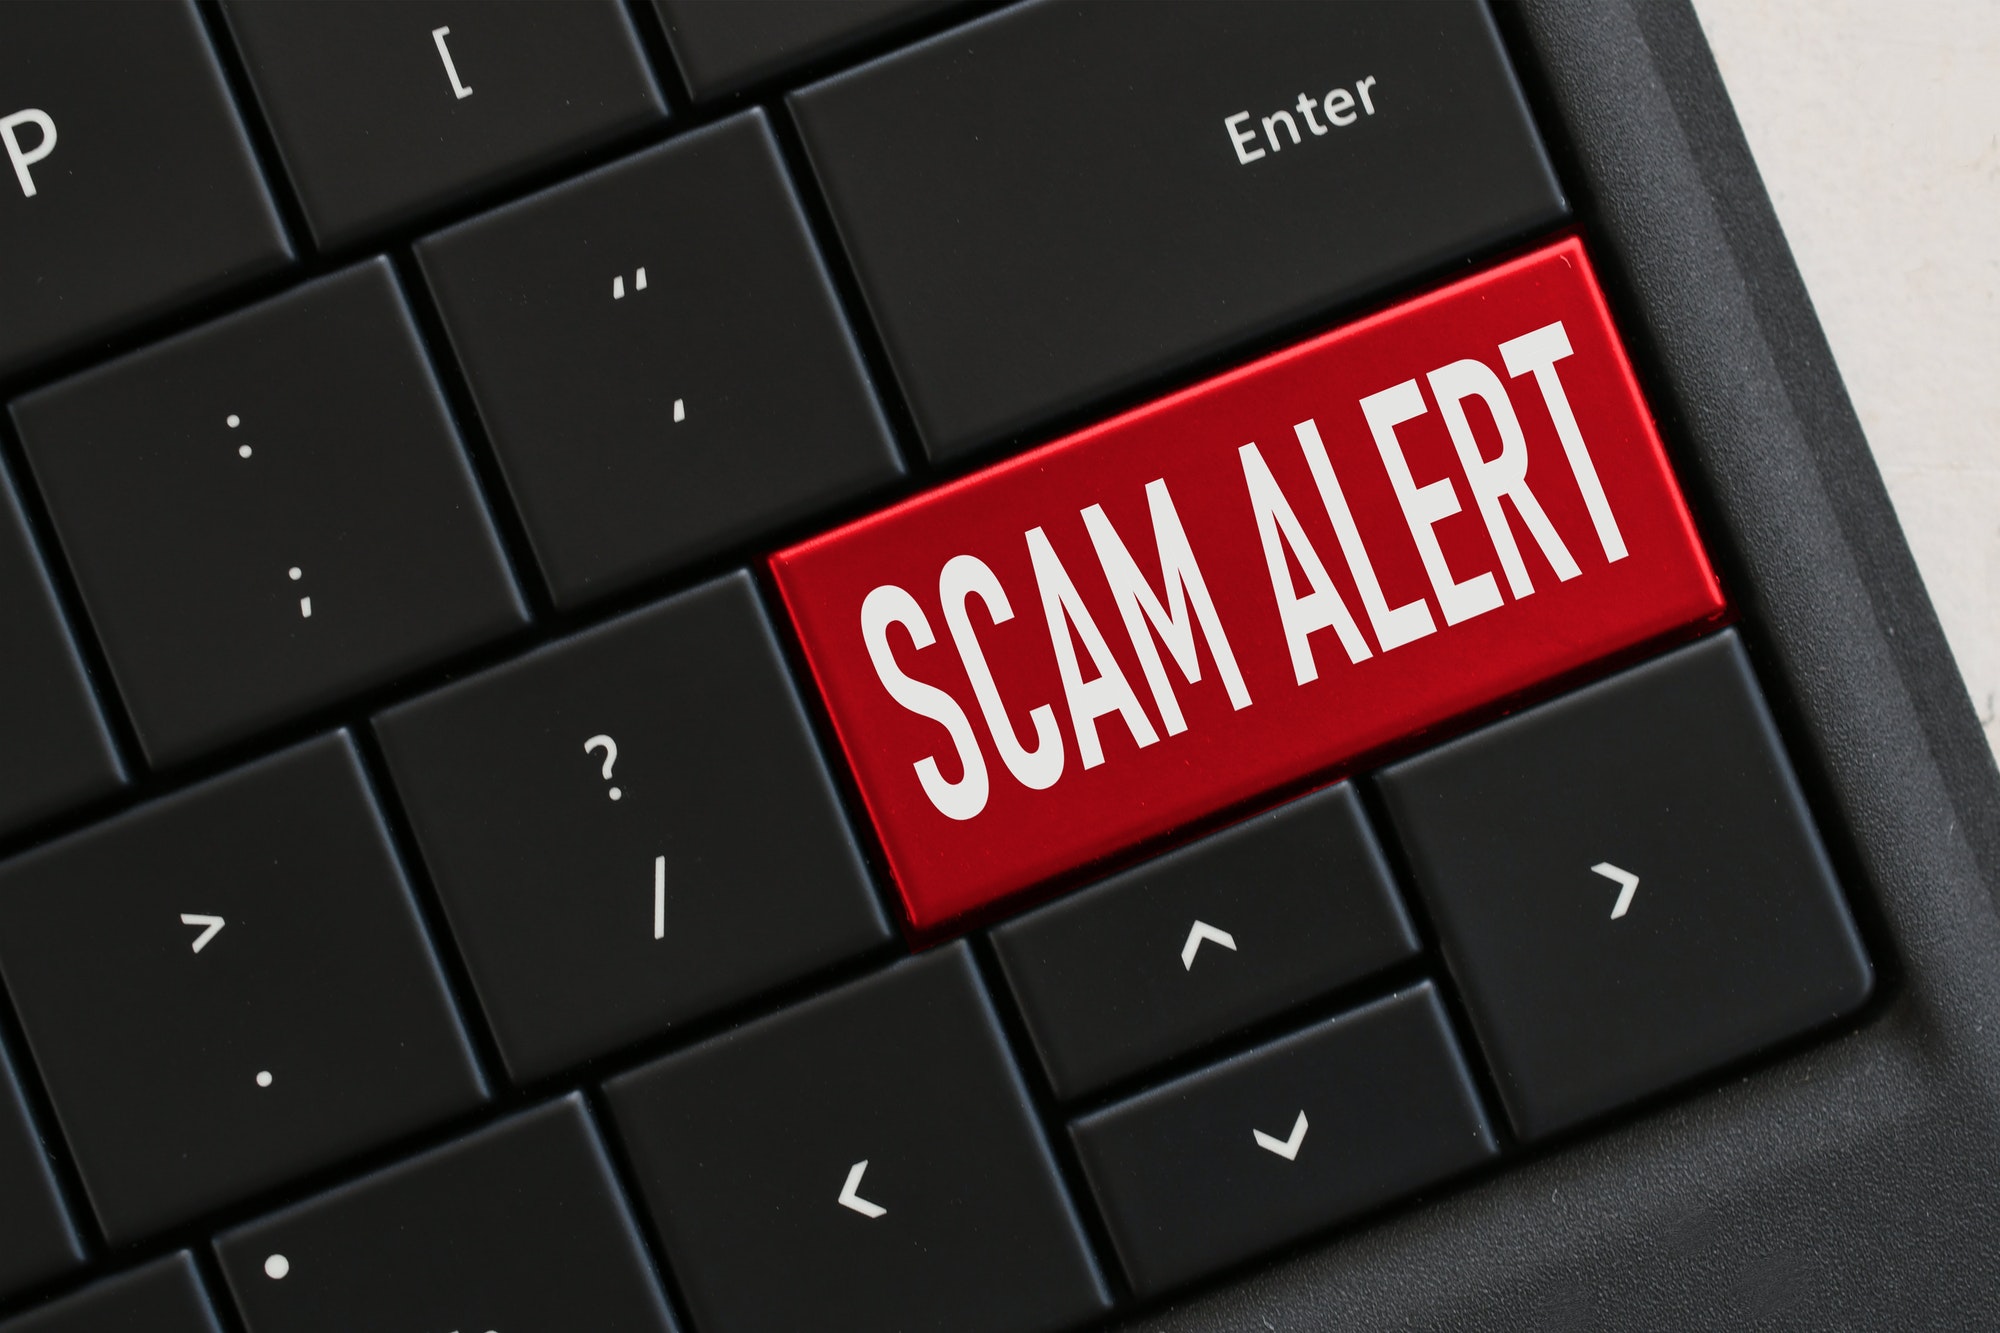 HMRC warns Self Assessment customers to be aware of scam calls and texts from fraudsters as Self Assessment deadline passes